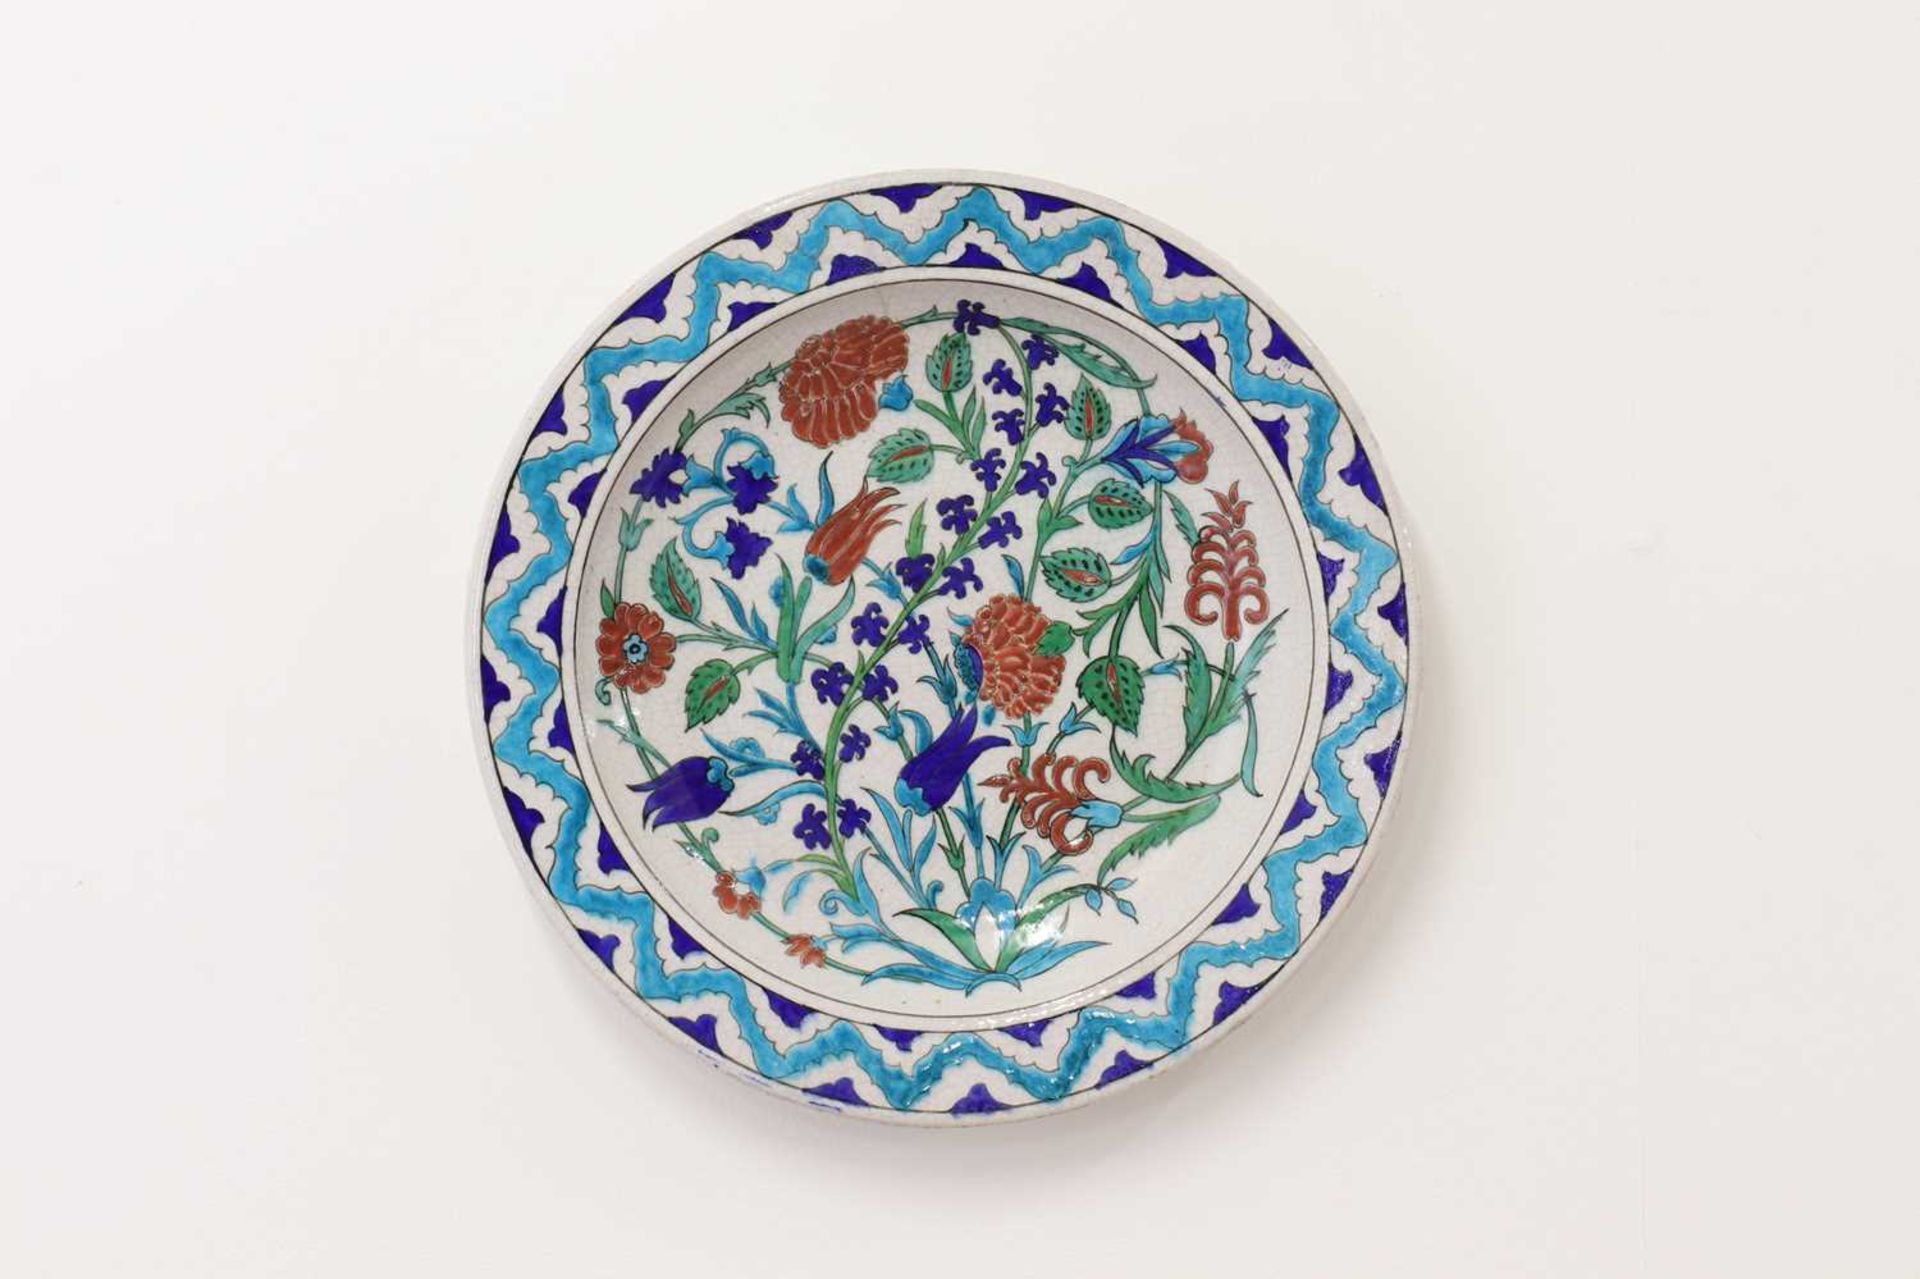 An Iznik-style pottery charger by Théodore Deck,